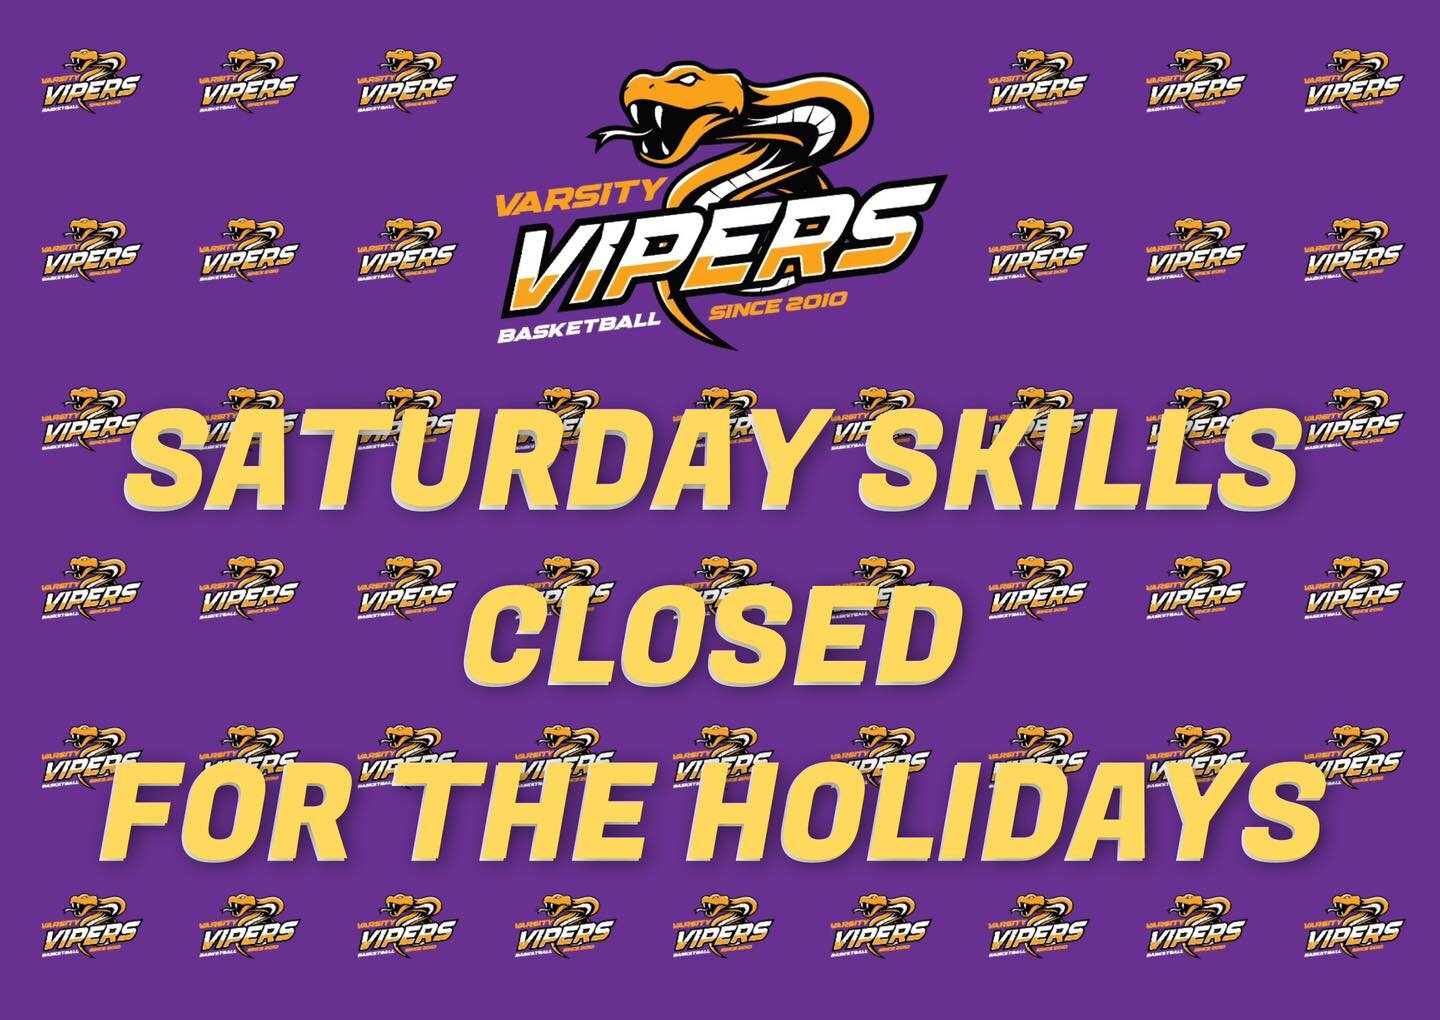 As the Easter Break is upon us our coaches will be taking a well earned break! Our Saturday Skills session will return on Saturday April 20! 

Have a happy and safe school holiday break!